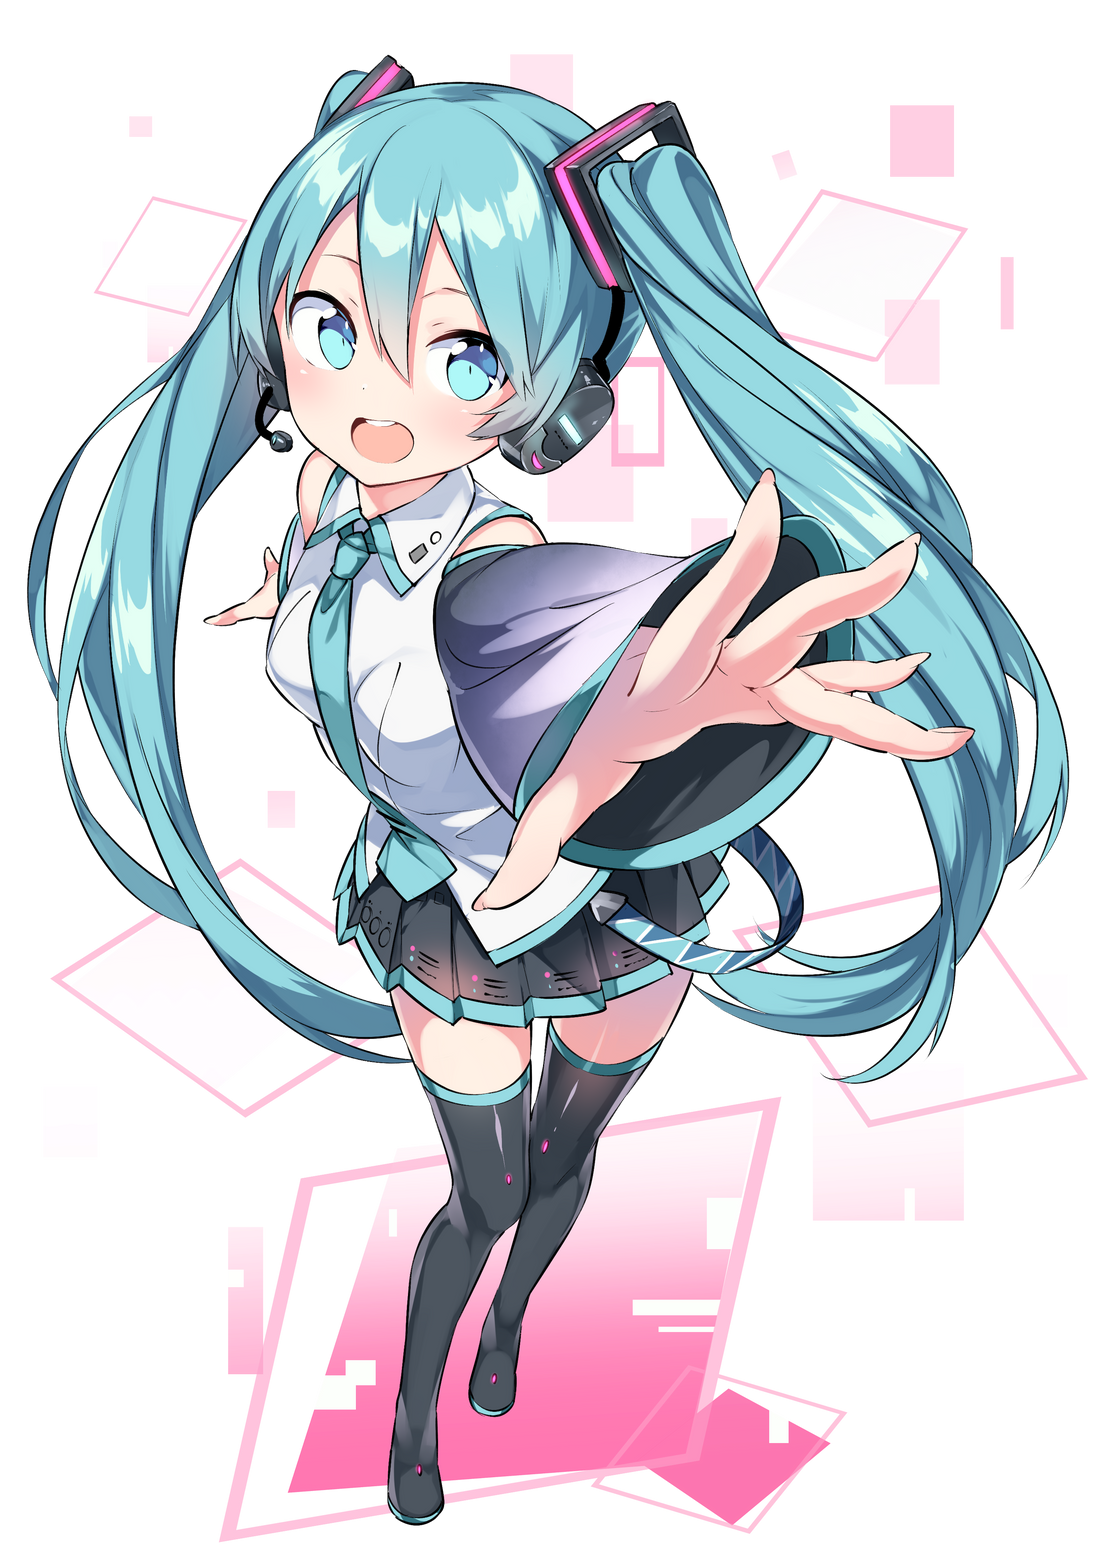 Hatsune Miku: How Her Rise To Fame And Massive Following Transformed Her Into The Icon She Is Today